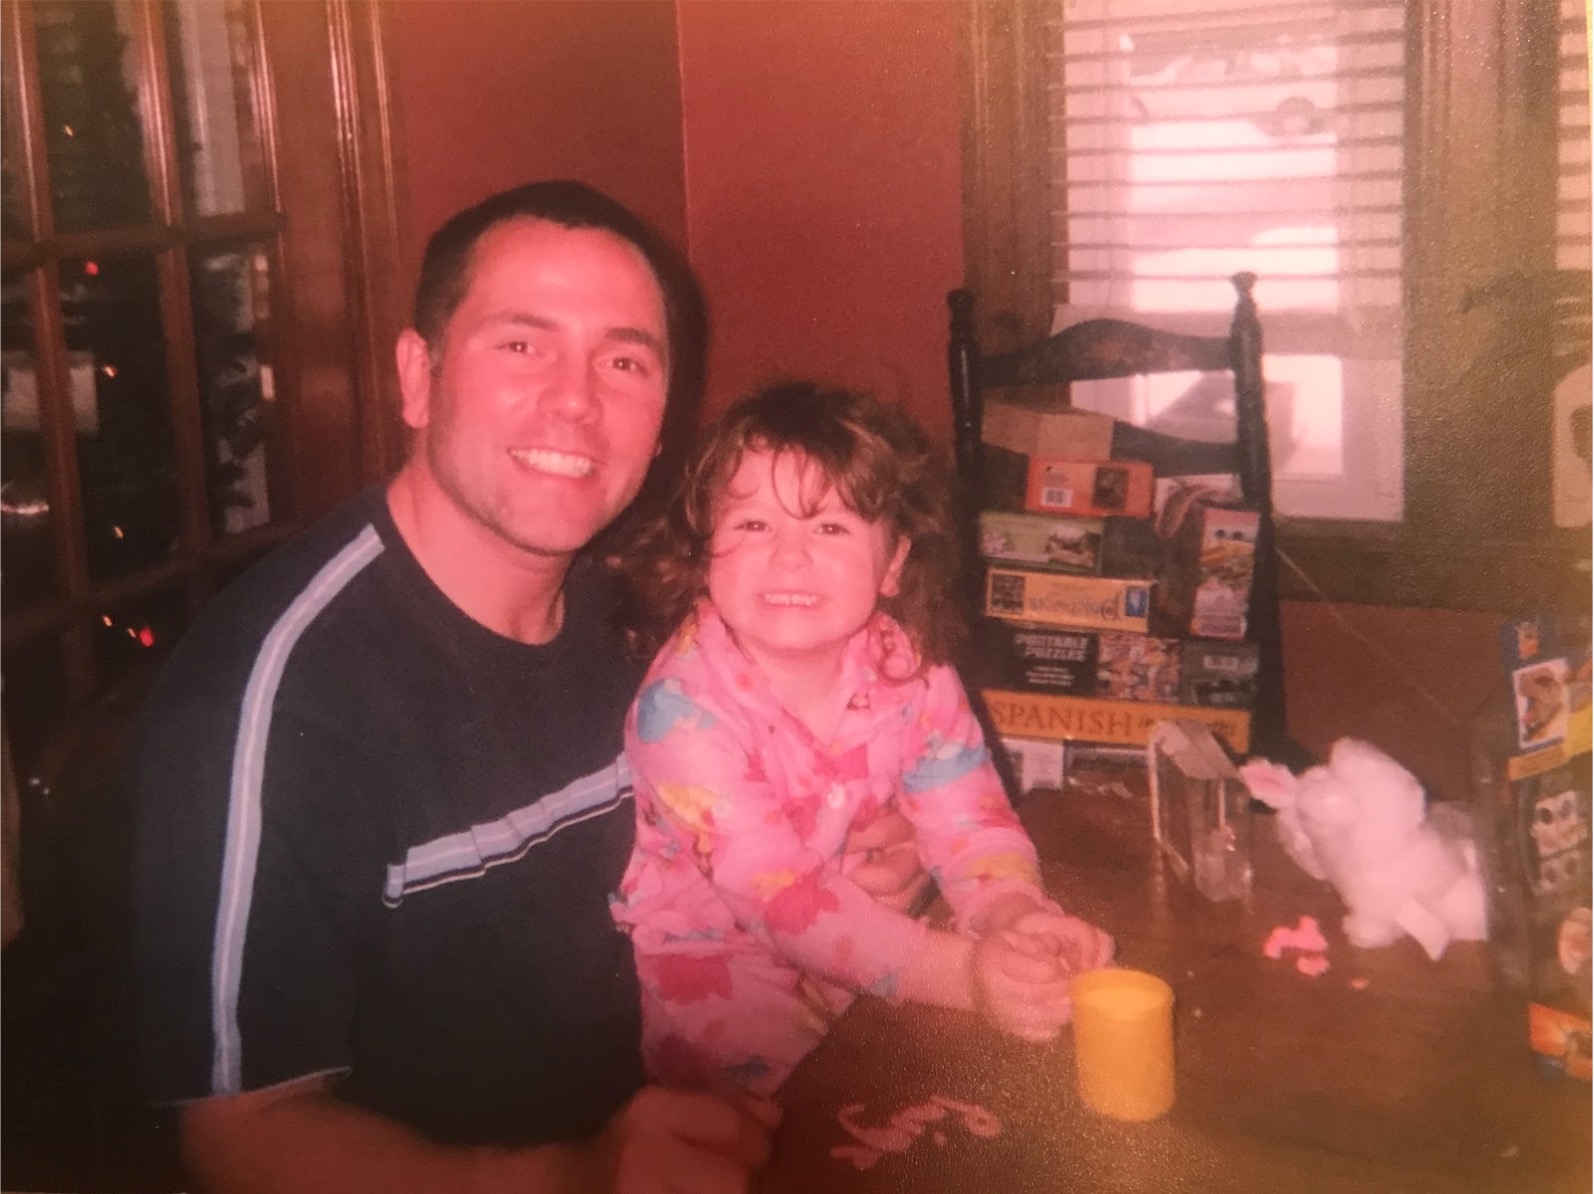 Alex and his daughter, Paige.